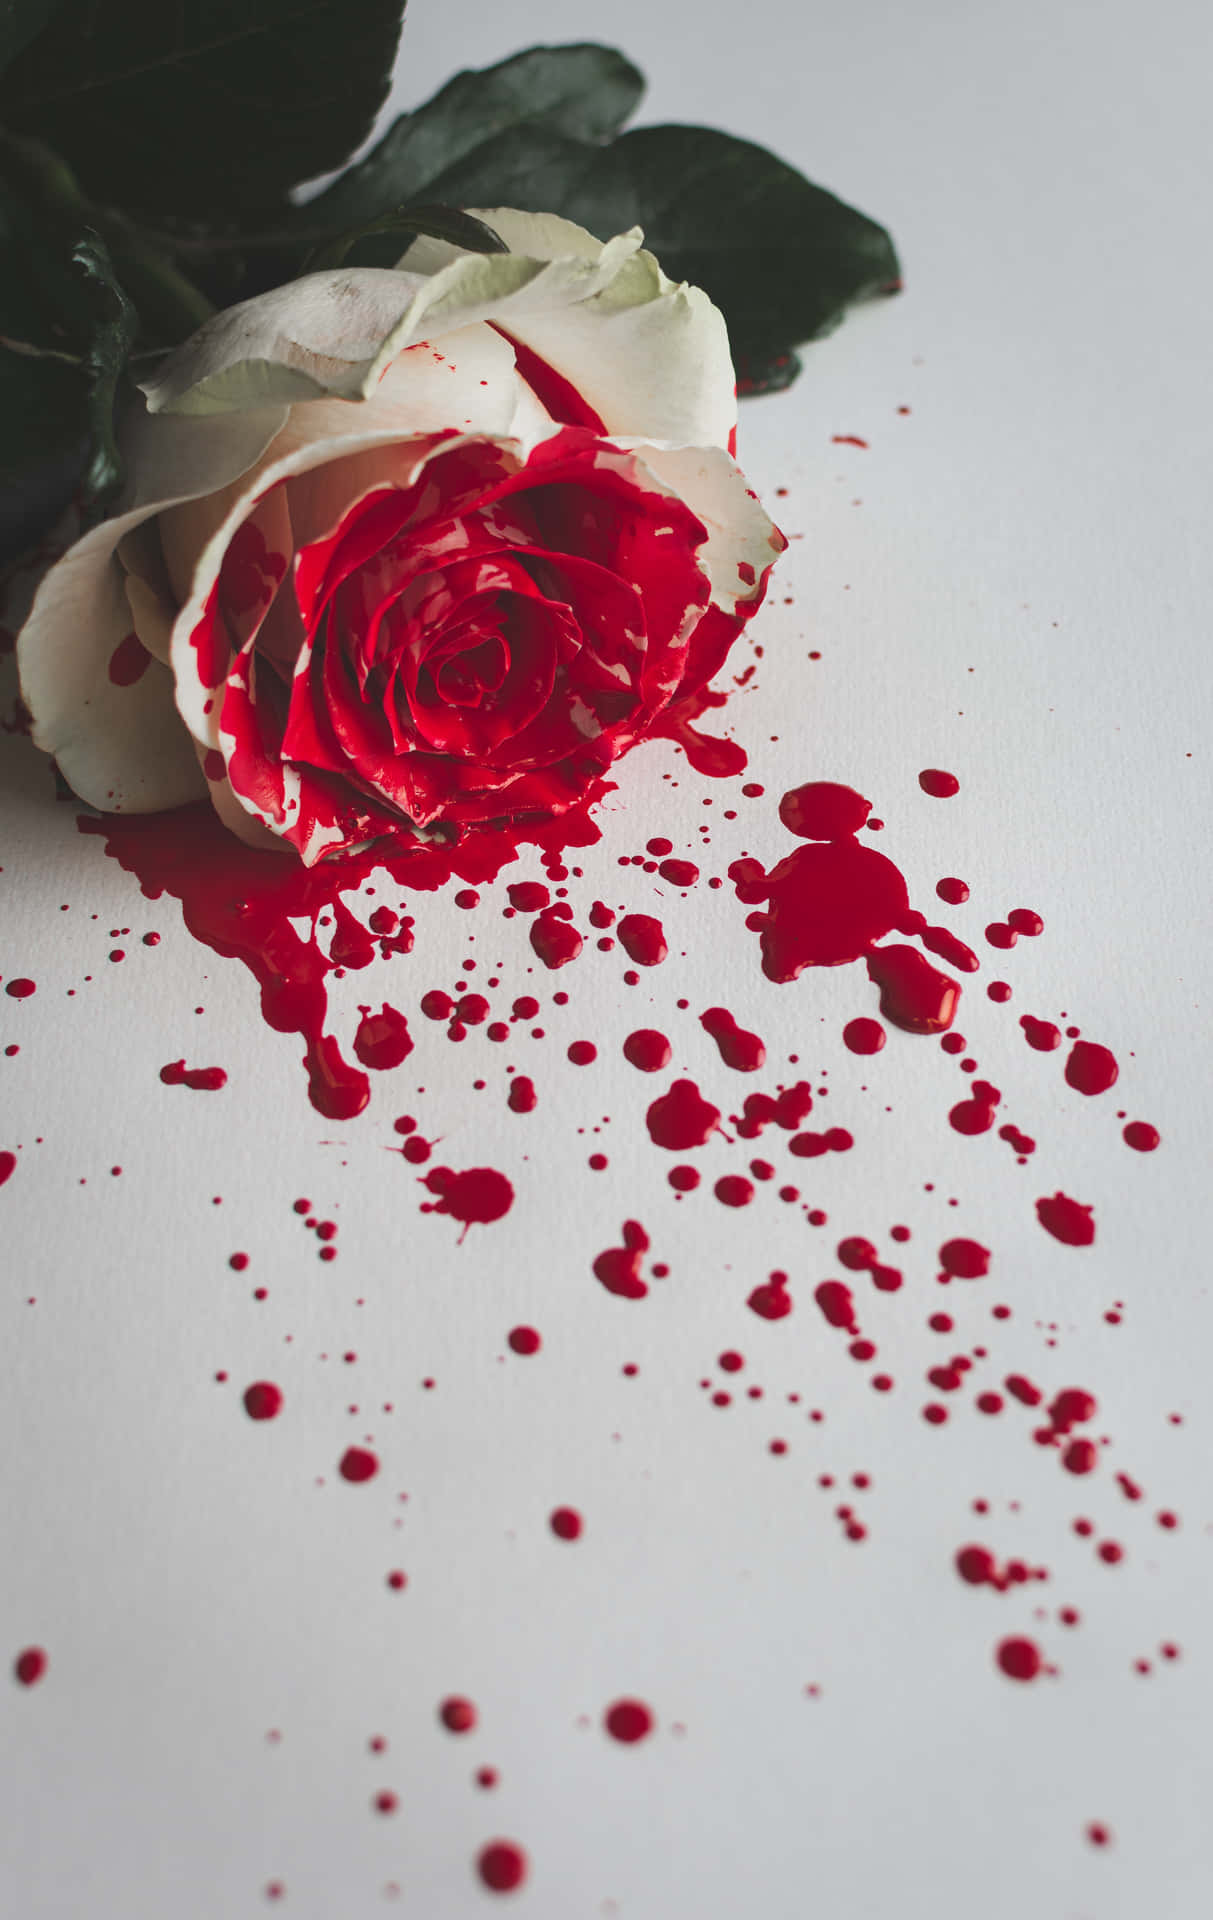 Red And White Roses With Blood Splash Wallpaper